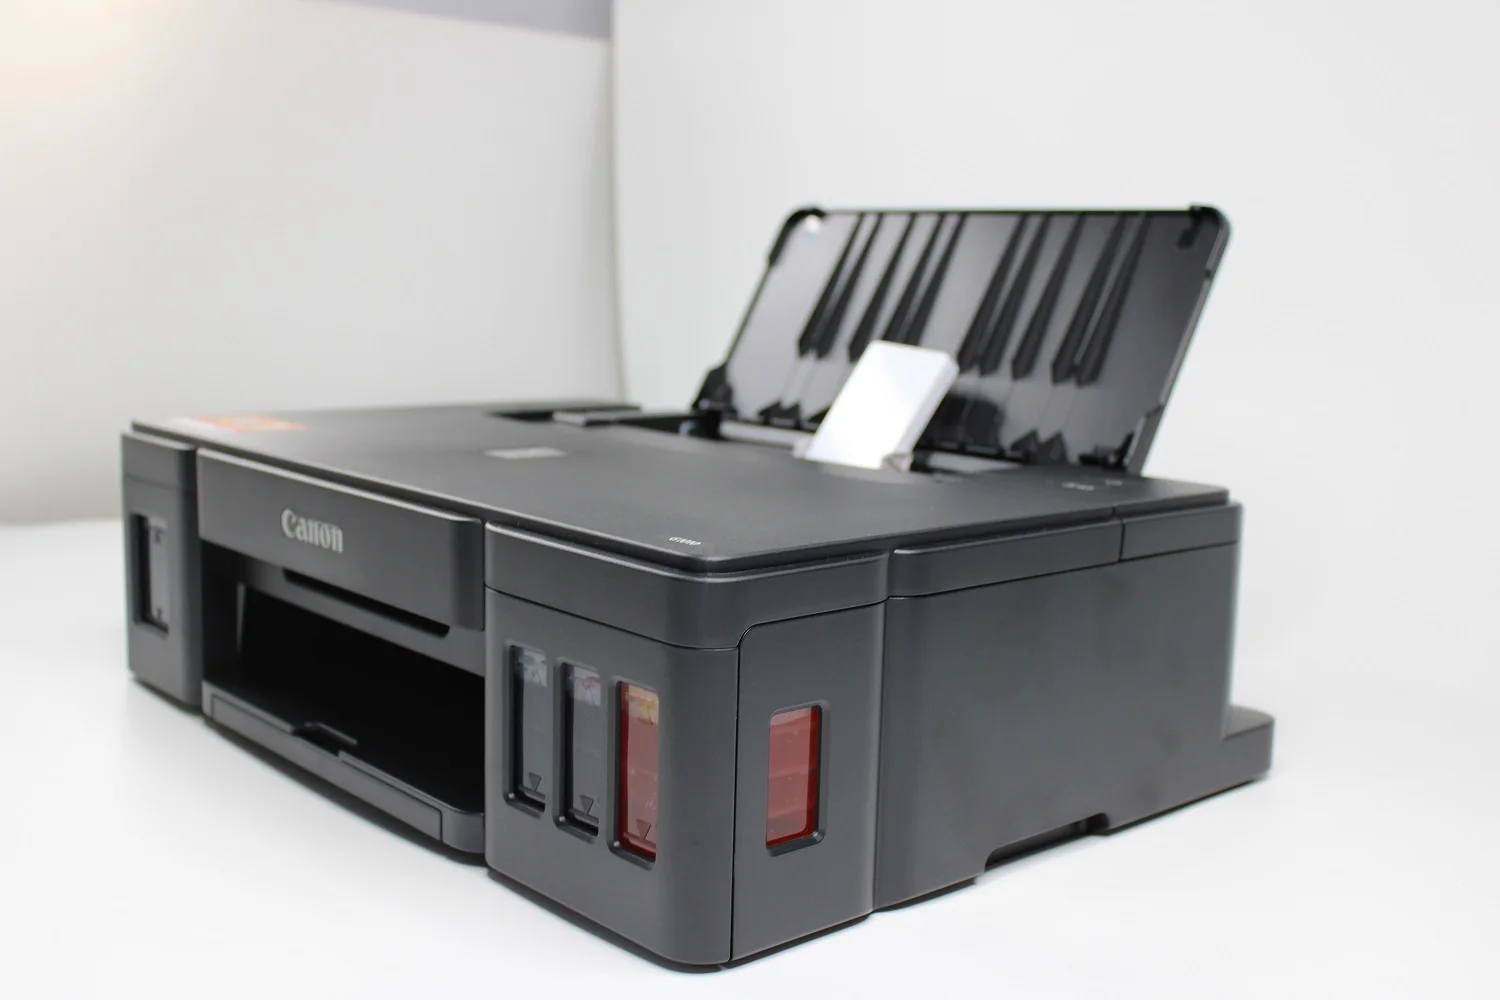 Canon G1010 Pvc Id Card Printer Without Tray Buy Canon Printer High Quality Id Card Priner Plastic Card Printer Product On Alibaba Com